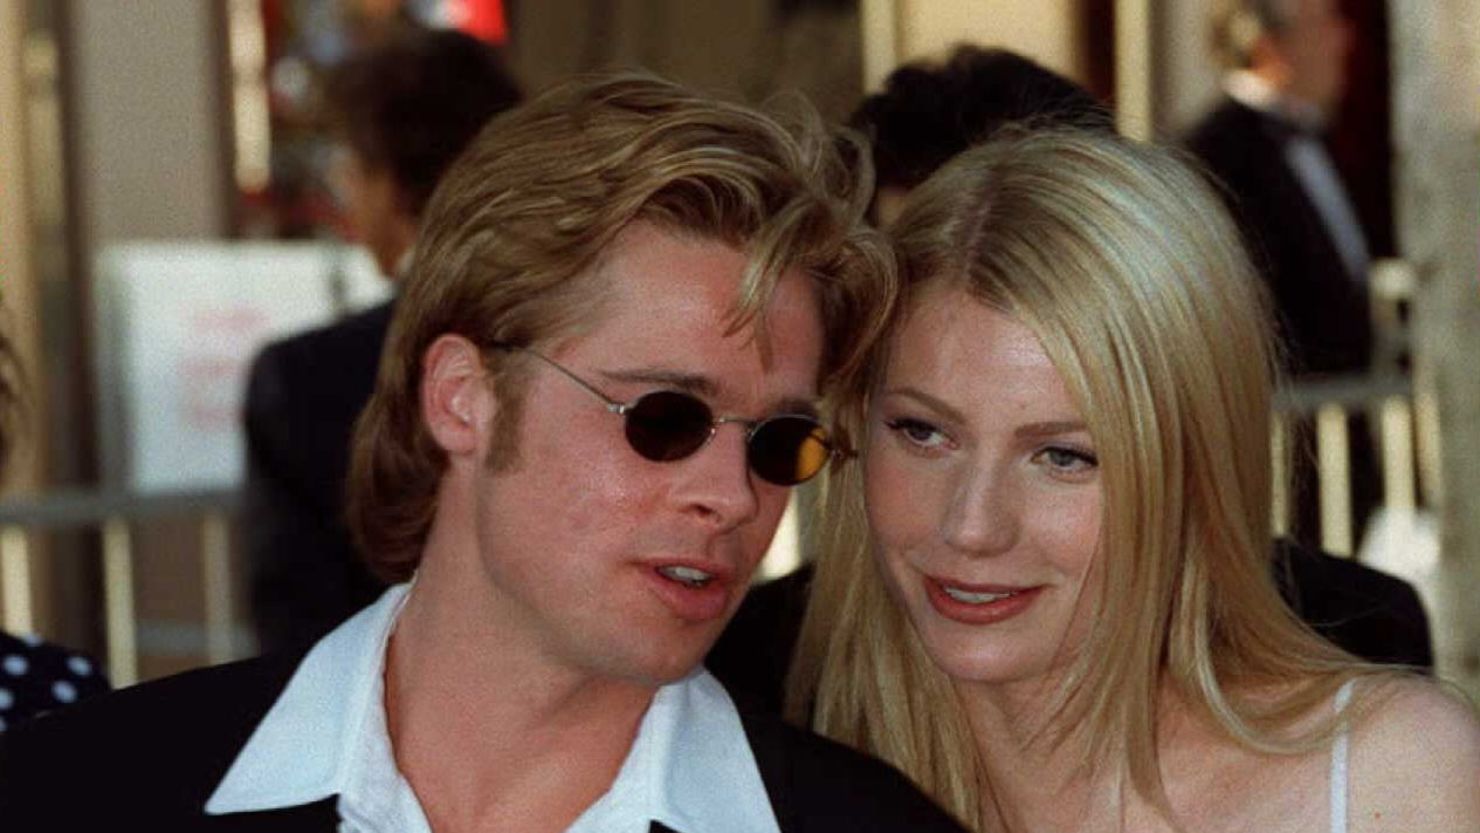 Brad Pitt and Gwyneth Paltrow arrive at the 68th annual Academy awards in Los Angeles in 1996. 